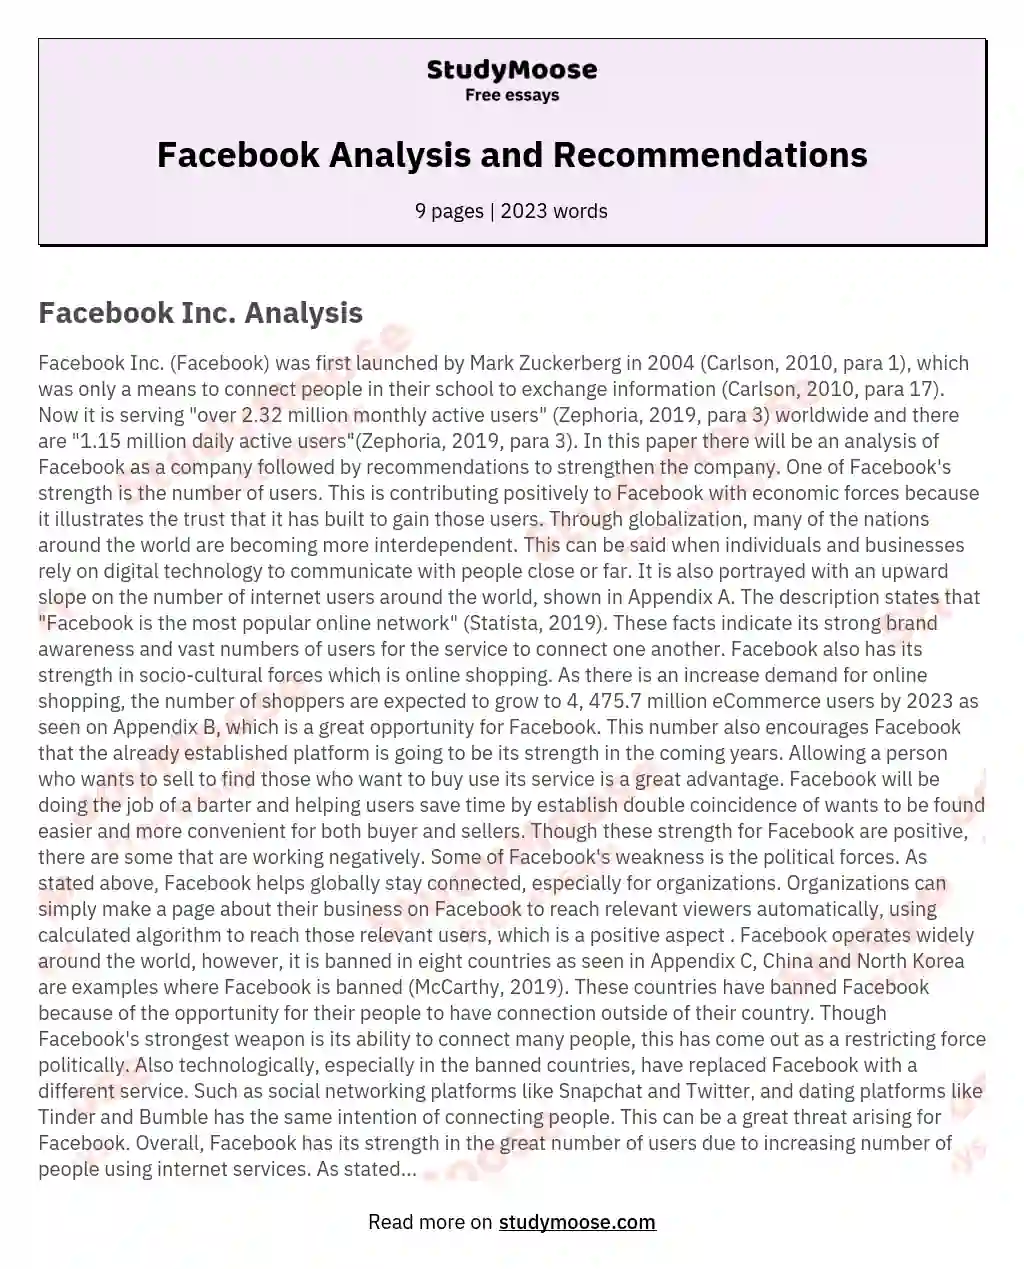 Facebook Analysis and Recommendations essay